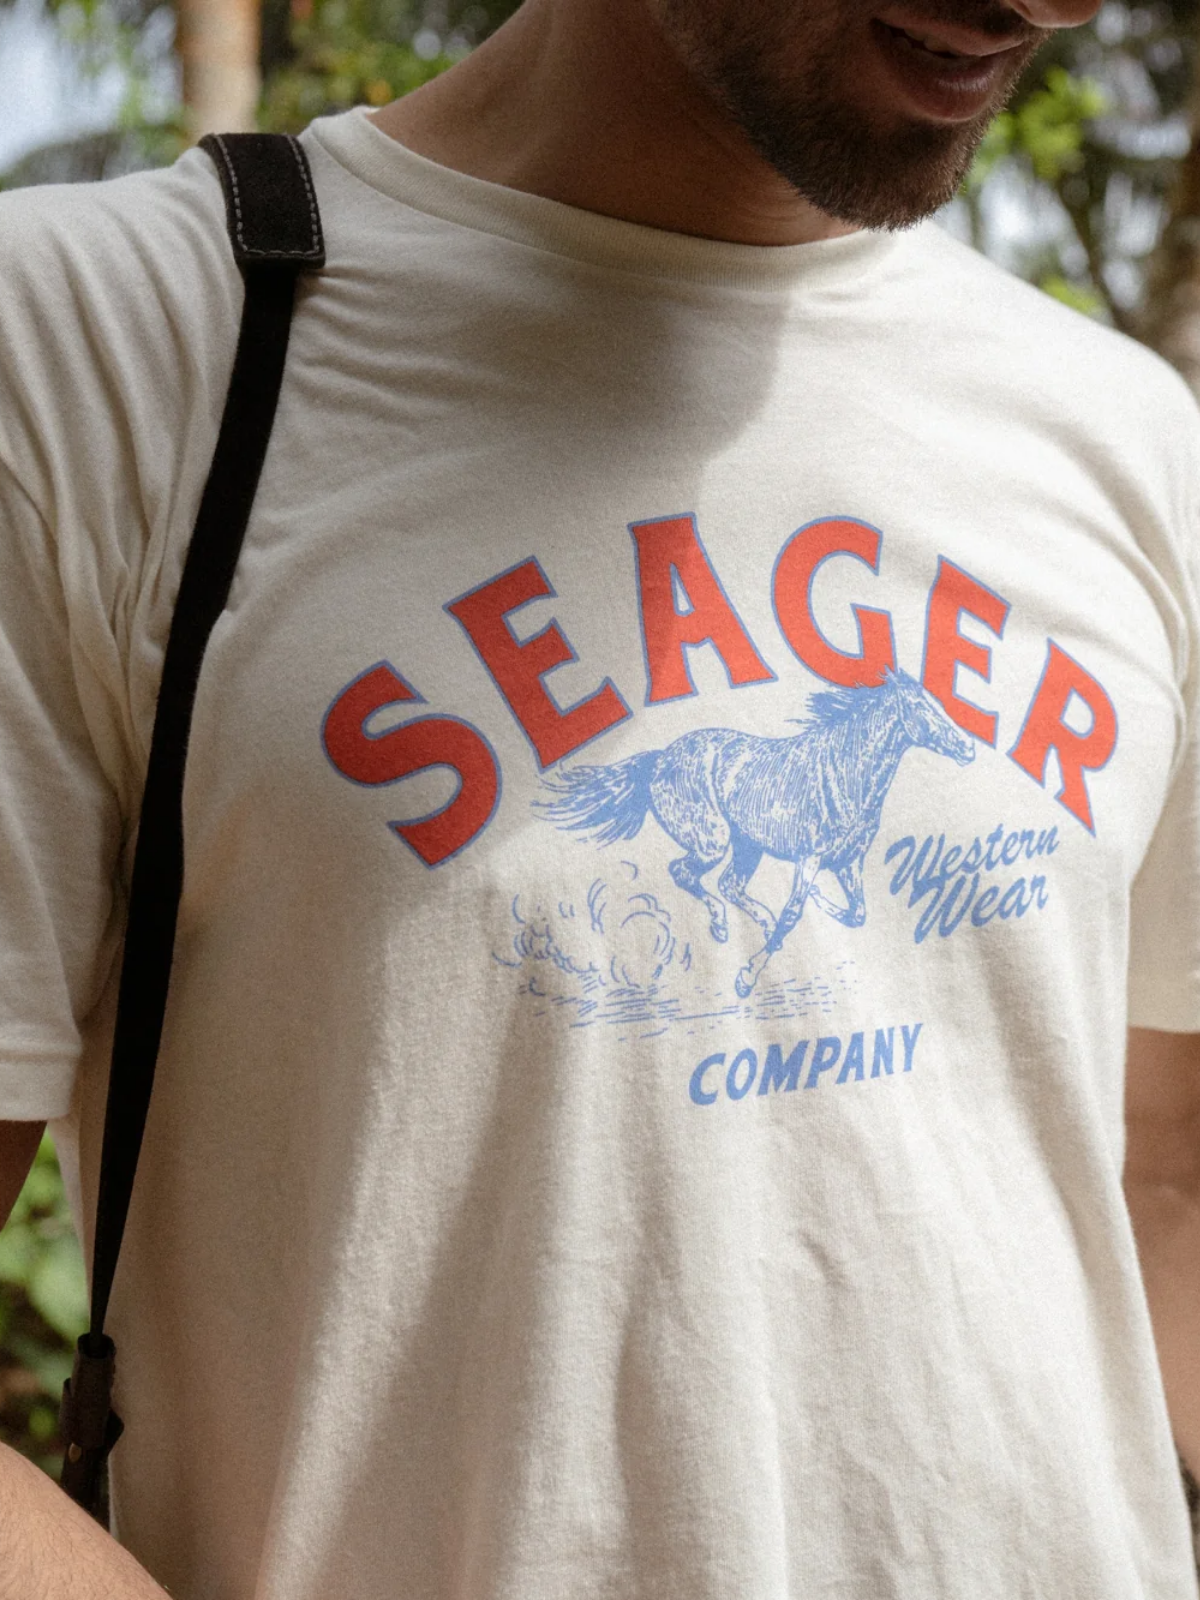 seager heritage tee natural white cream red blue graphic t-shirt 100% cotton kempt athens ga georgia men's clothing store